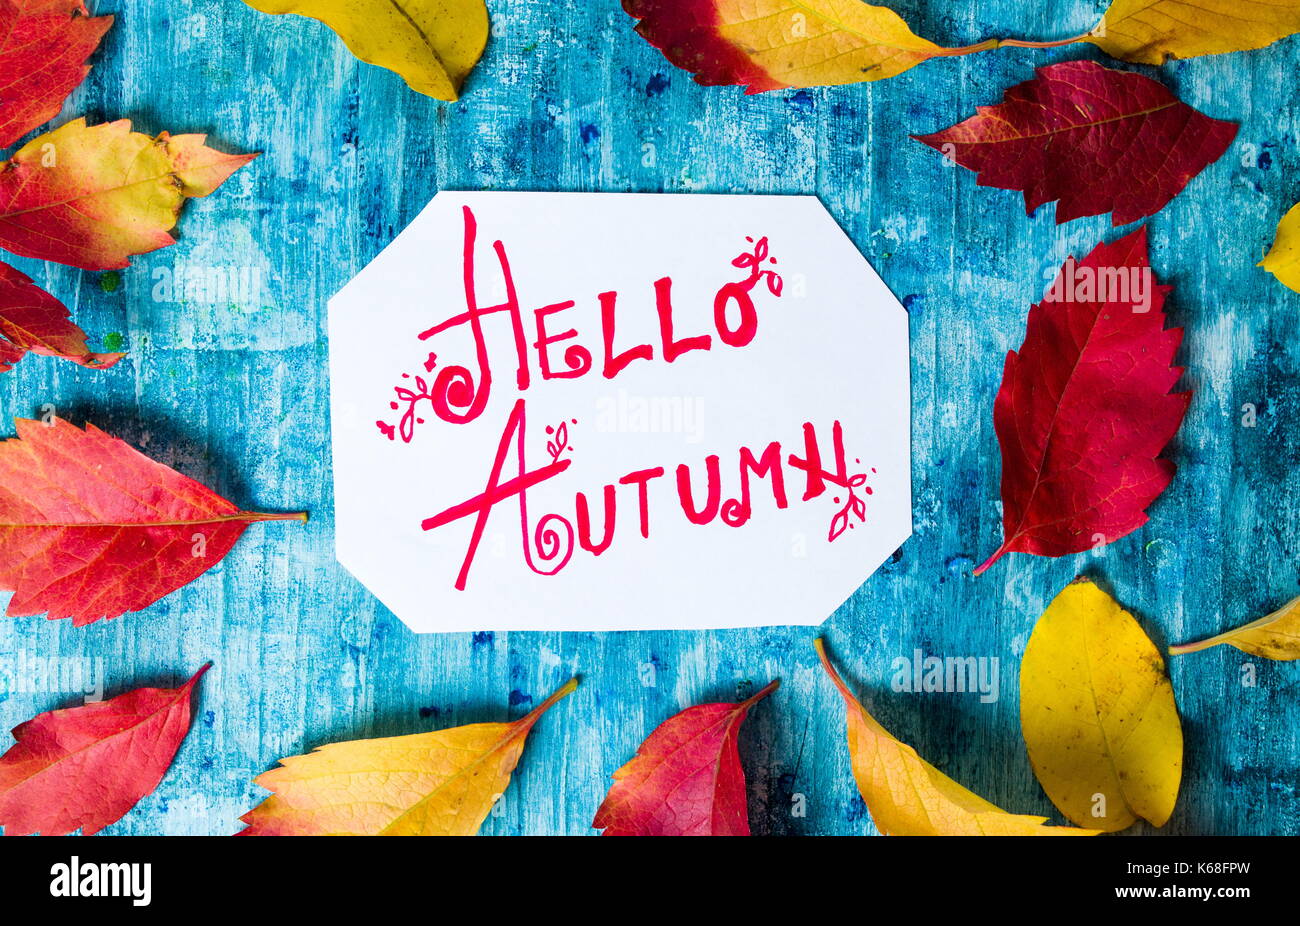 Hello Autumn calligraphy note with fallen leaves on blue board Stock Photo